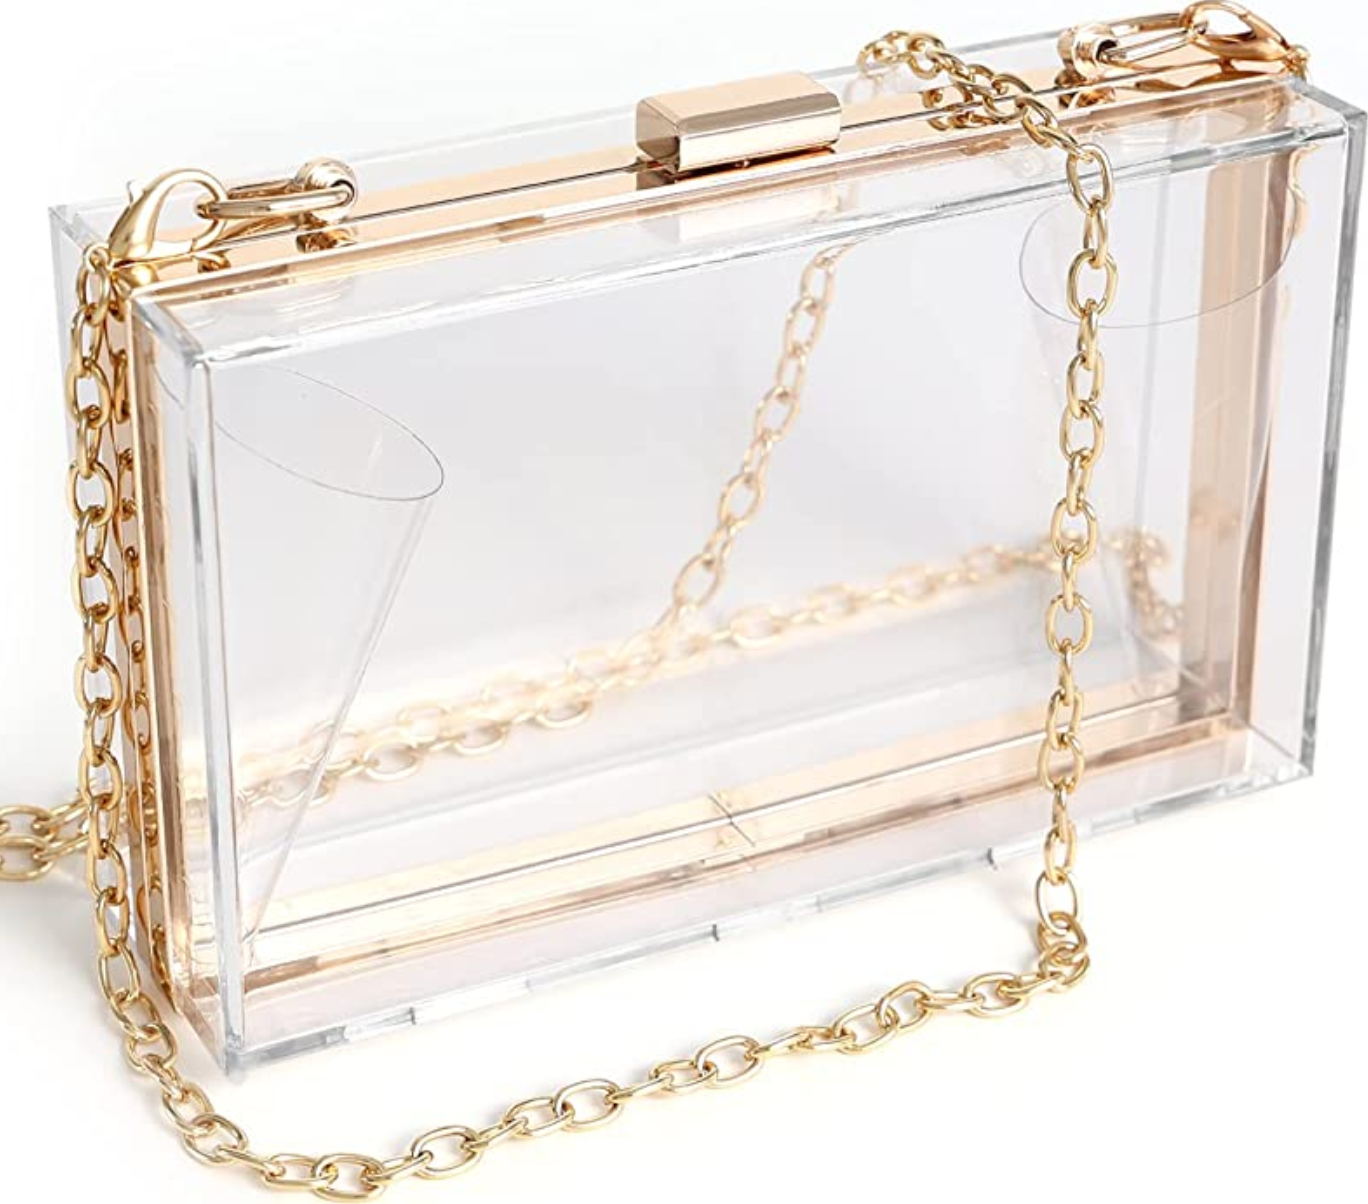 Would You Carry a Clear Handbag? - WSJ